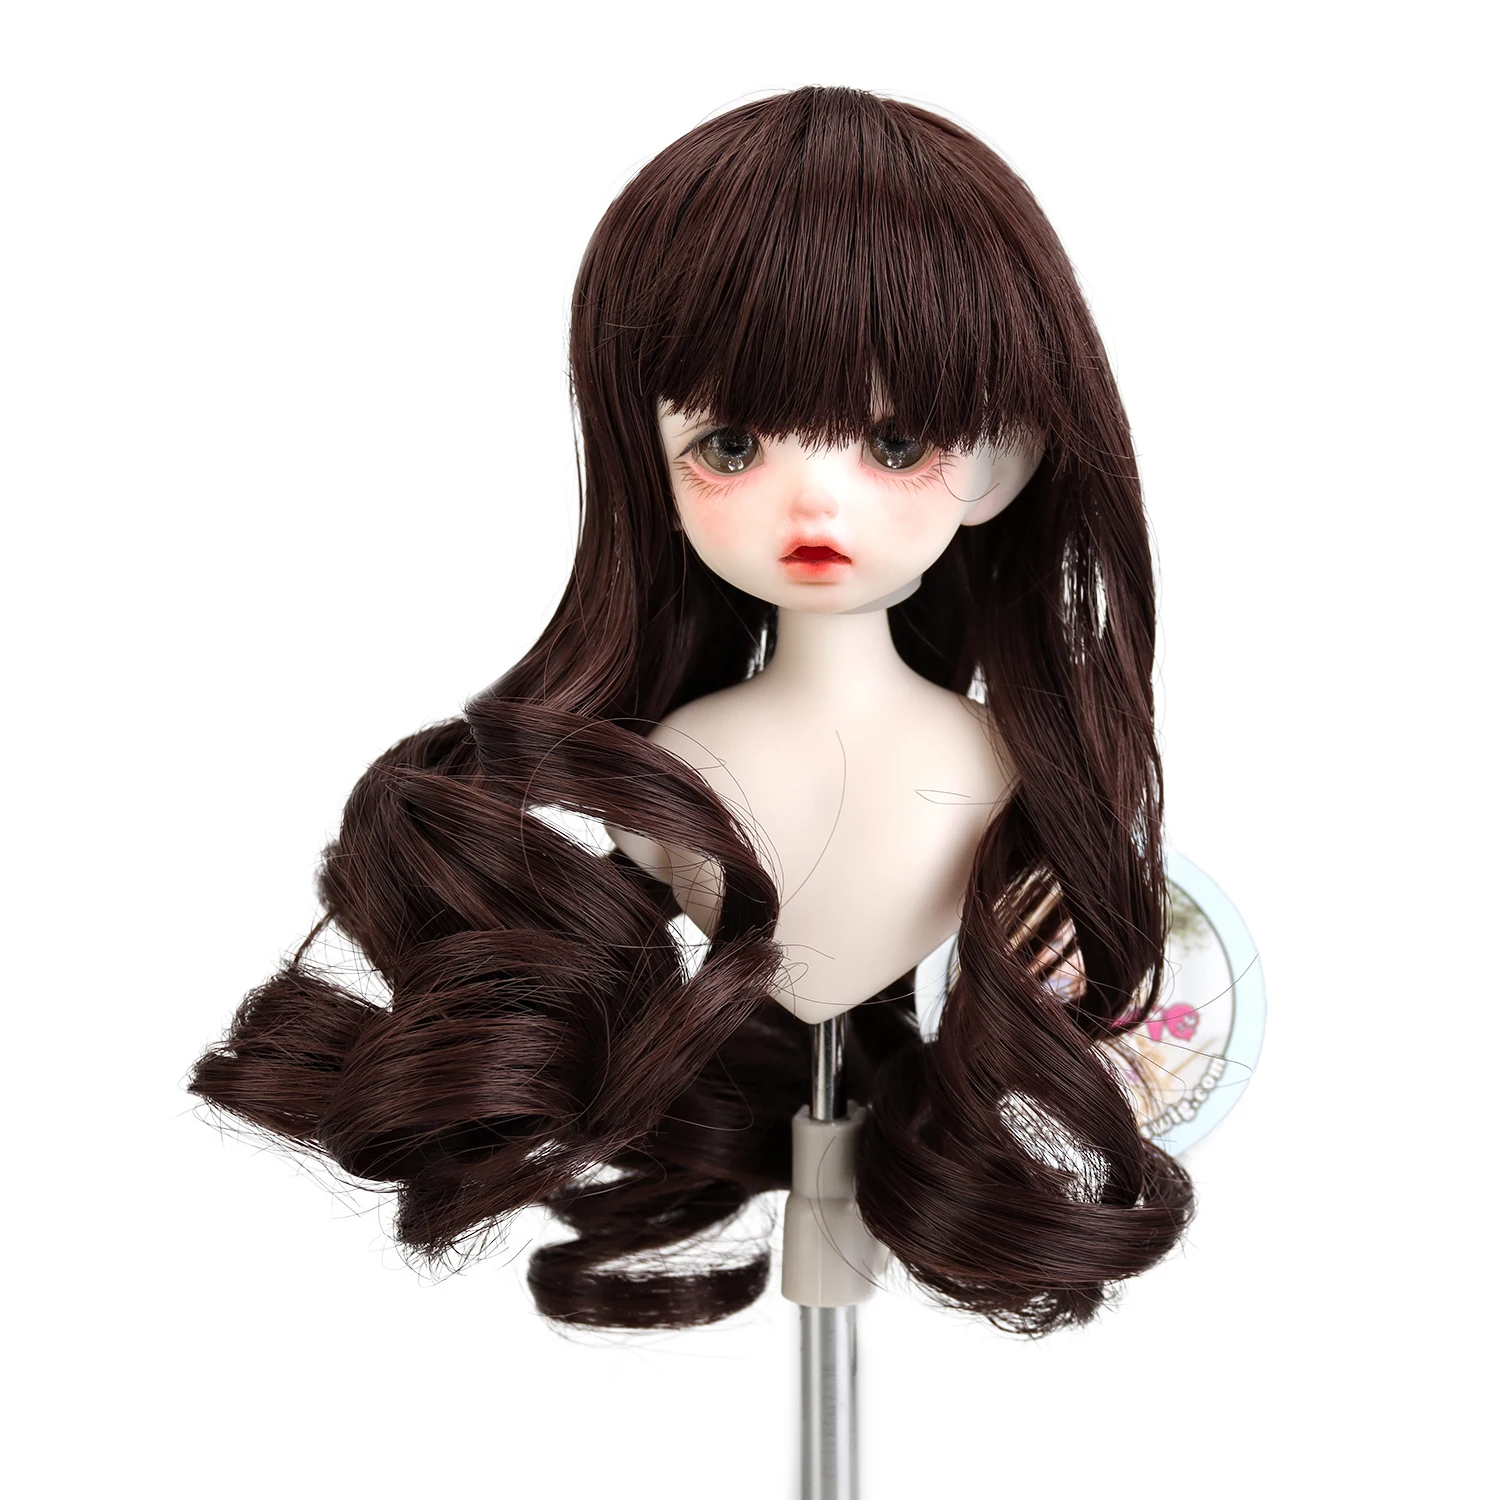 1/6 BJD Doll Wigs 6-7'' Long Curly Natural Color With Bangs MSD DIY Doll Make Accessories Doll Tress Wig Hair long water wave none lace ginger orange high temperature wigs for women afro cosplay party daily synthetic hair wigs with bangs